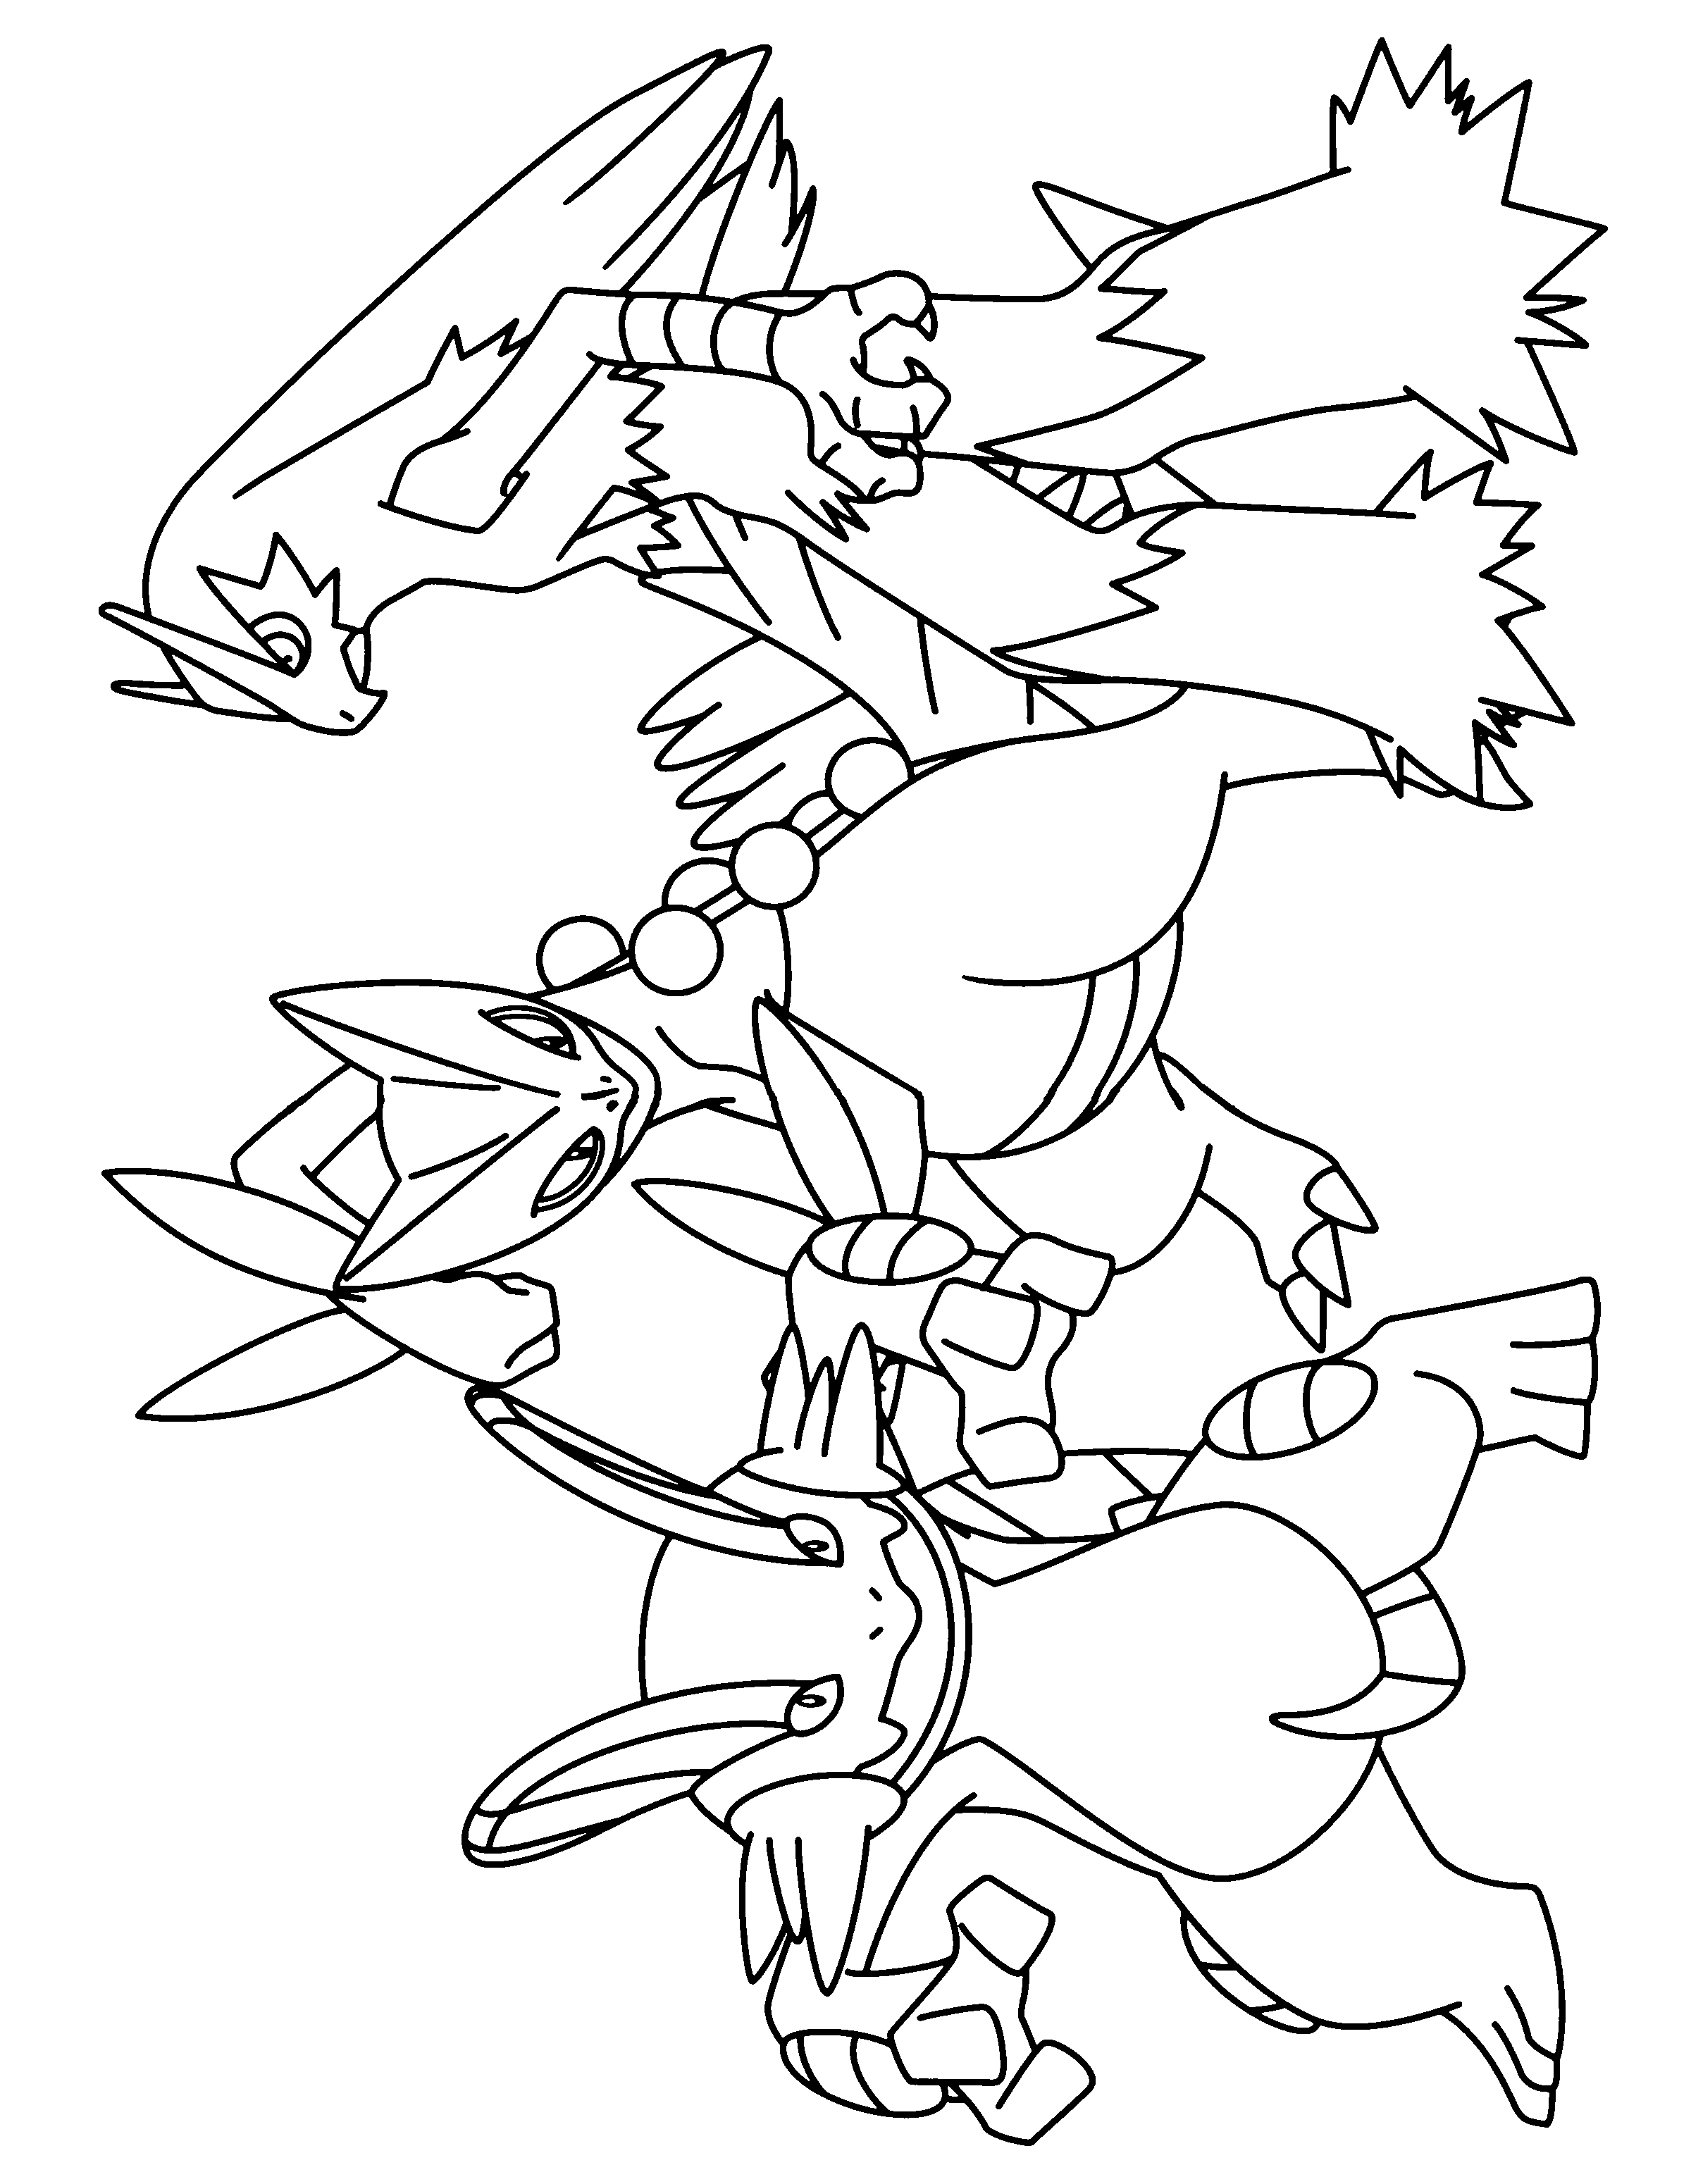 coloring pages for pokemon pokemon coloring pages join your favorite pokemon on an pages for pokemon coloring 